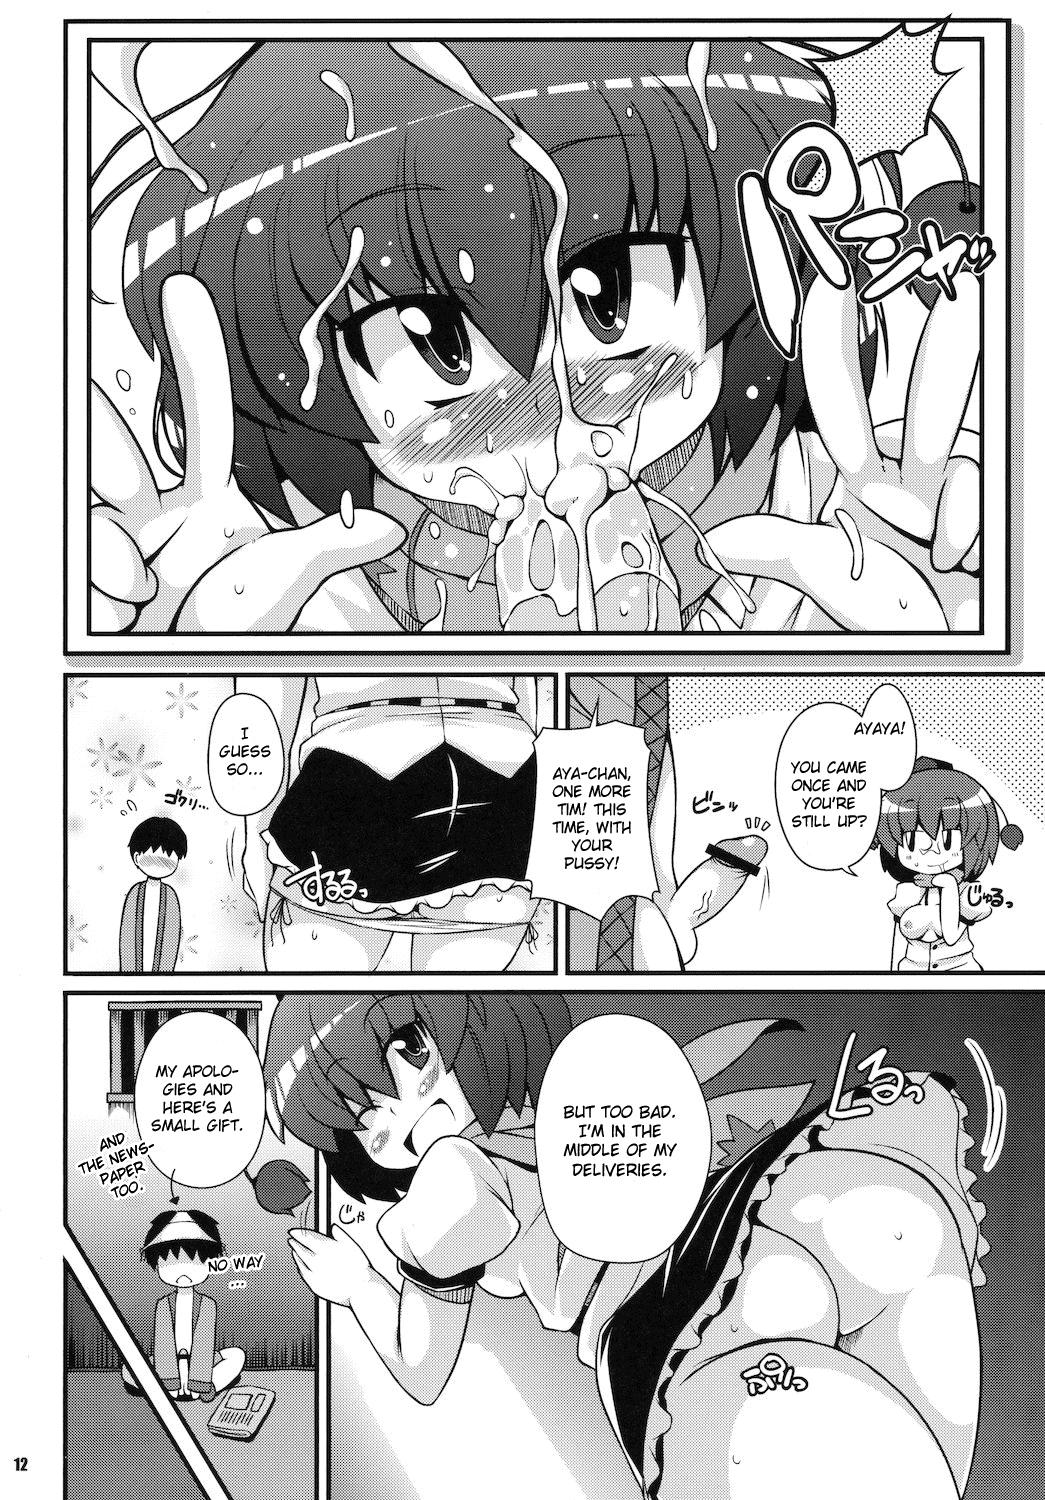 Friends Mediaron! - Touhou project Hard Sex - Page 11